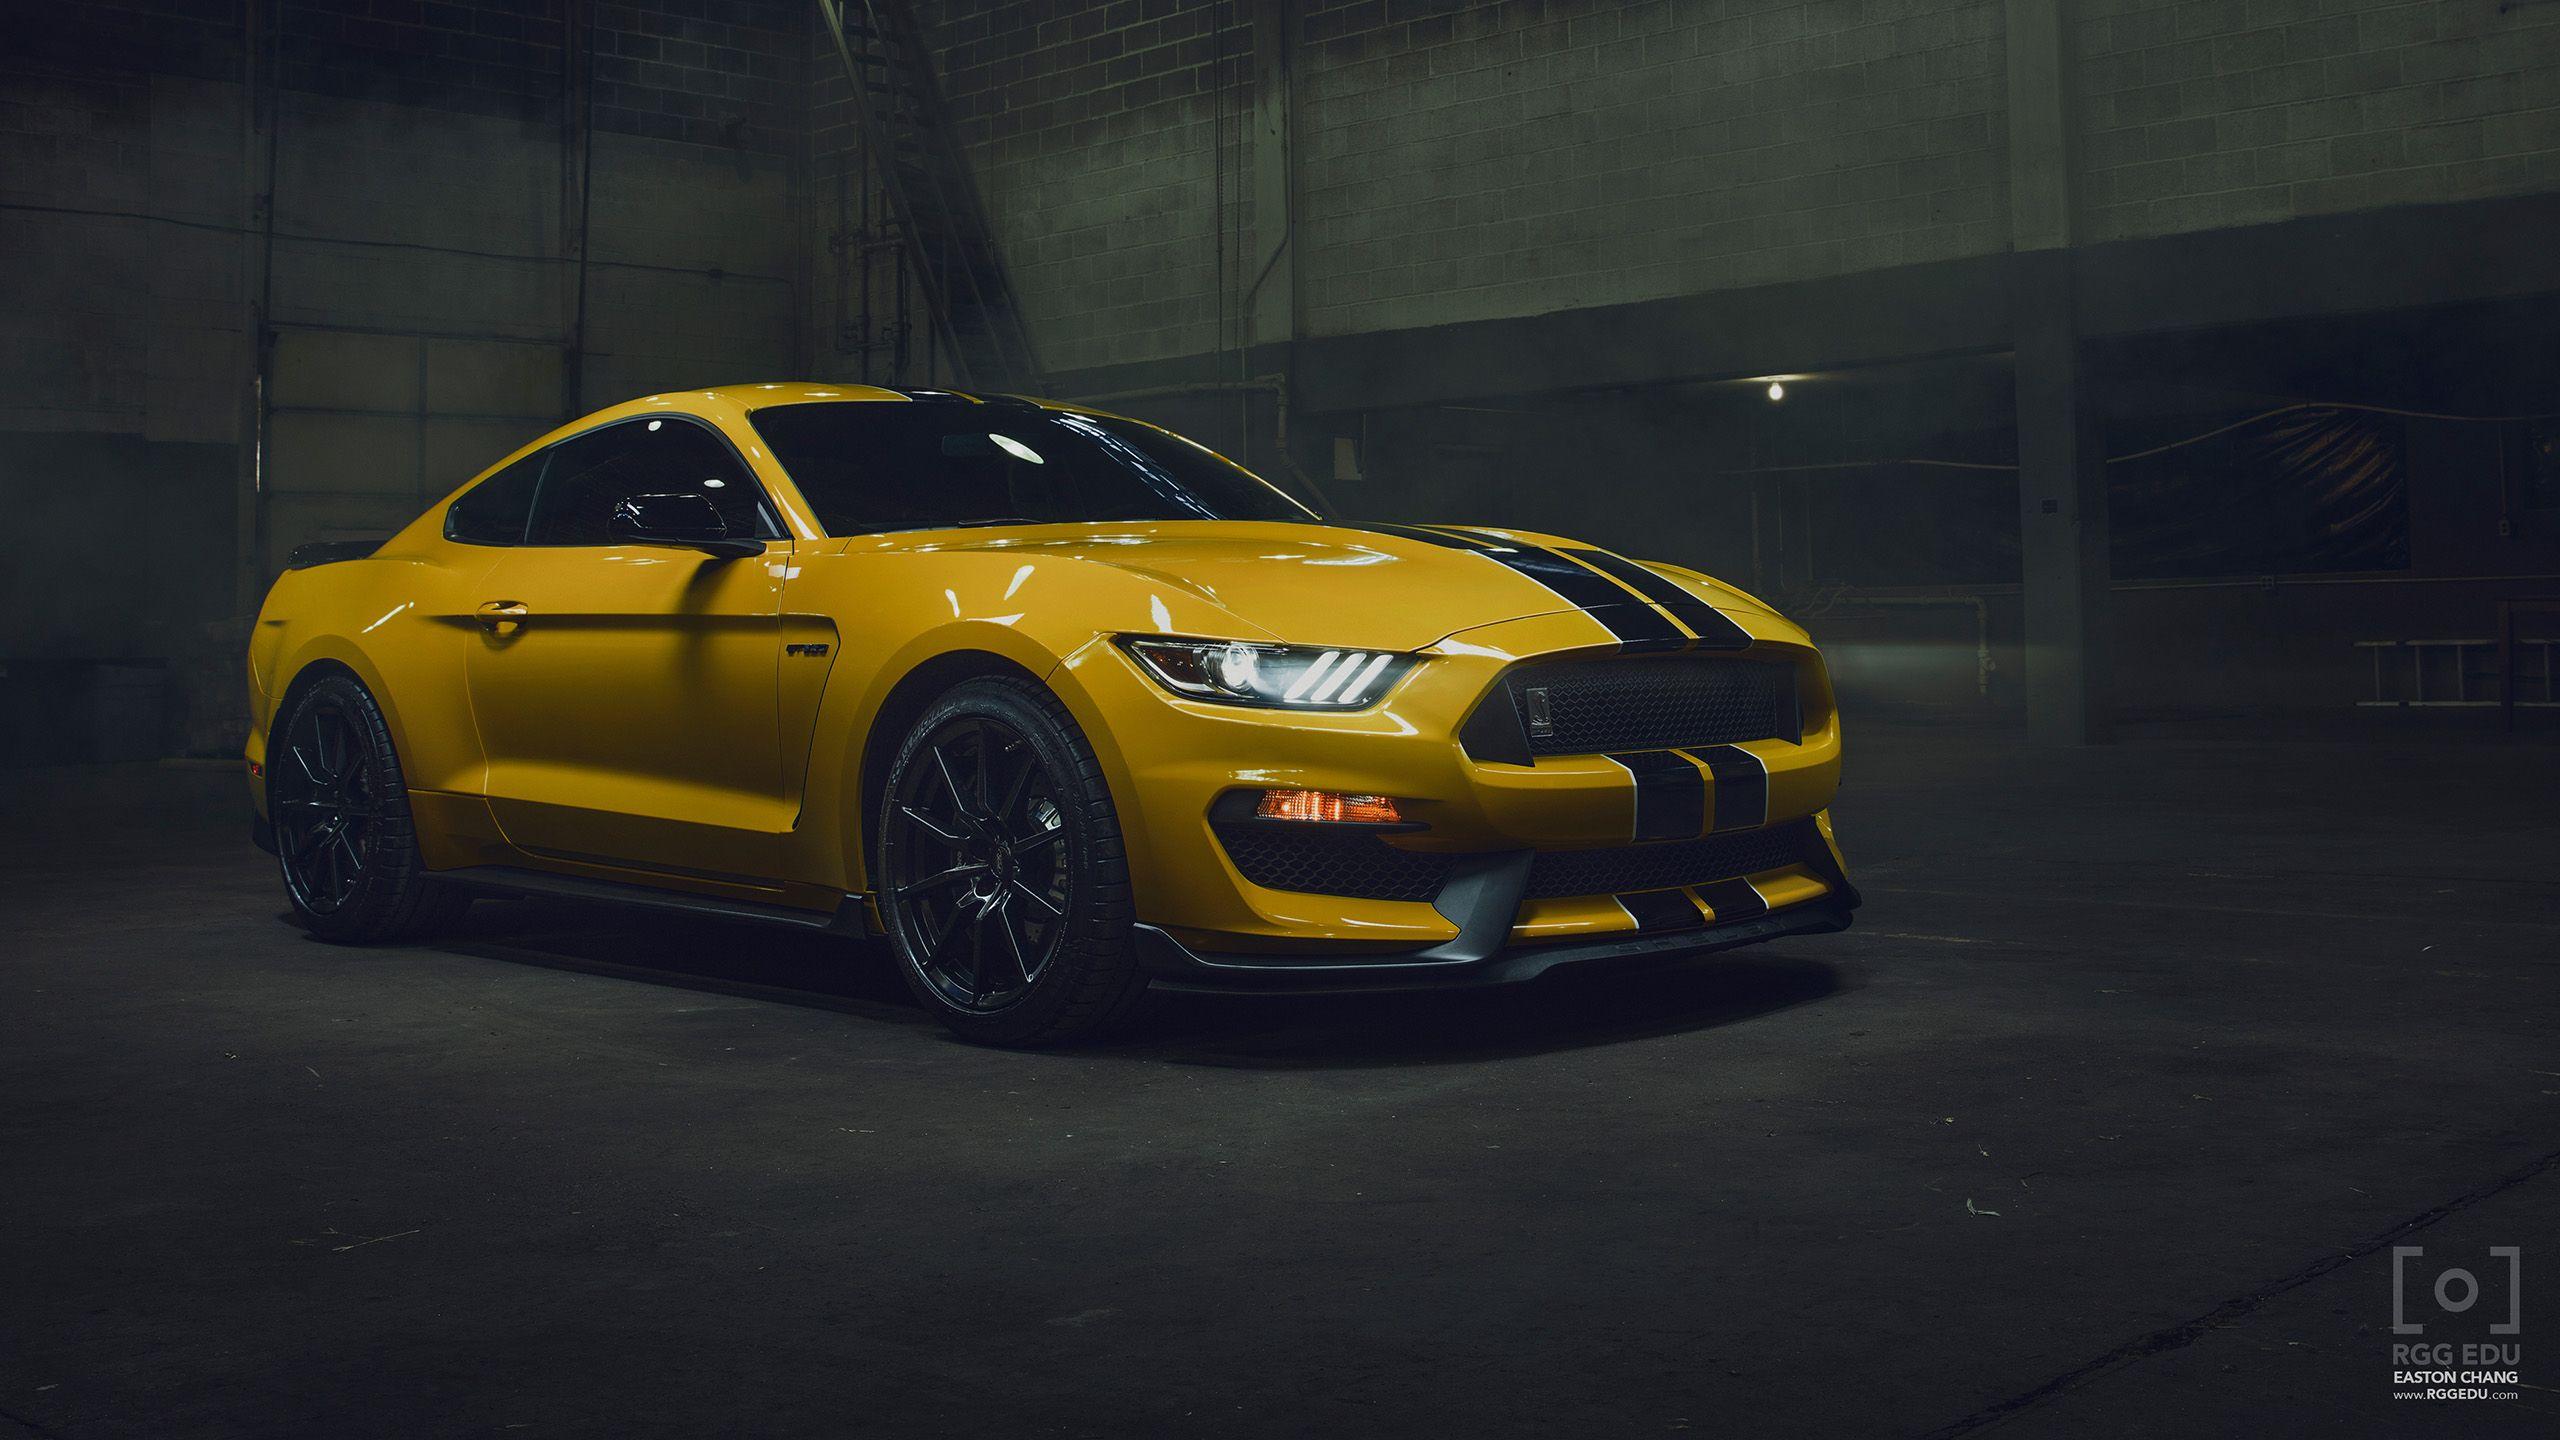 Ford Mustang Shelby Wallpapers Wallpaper Cave